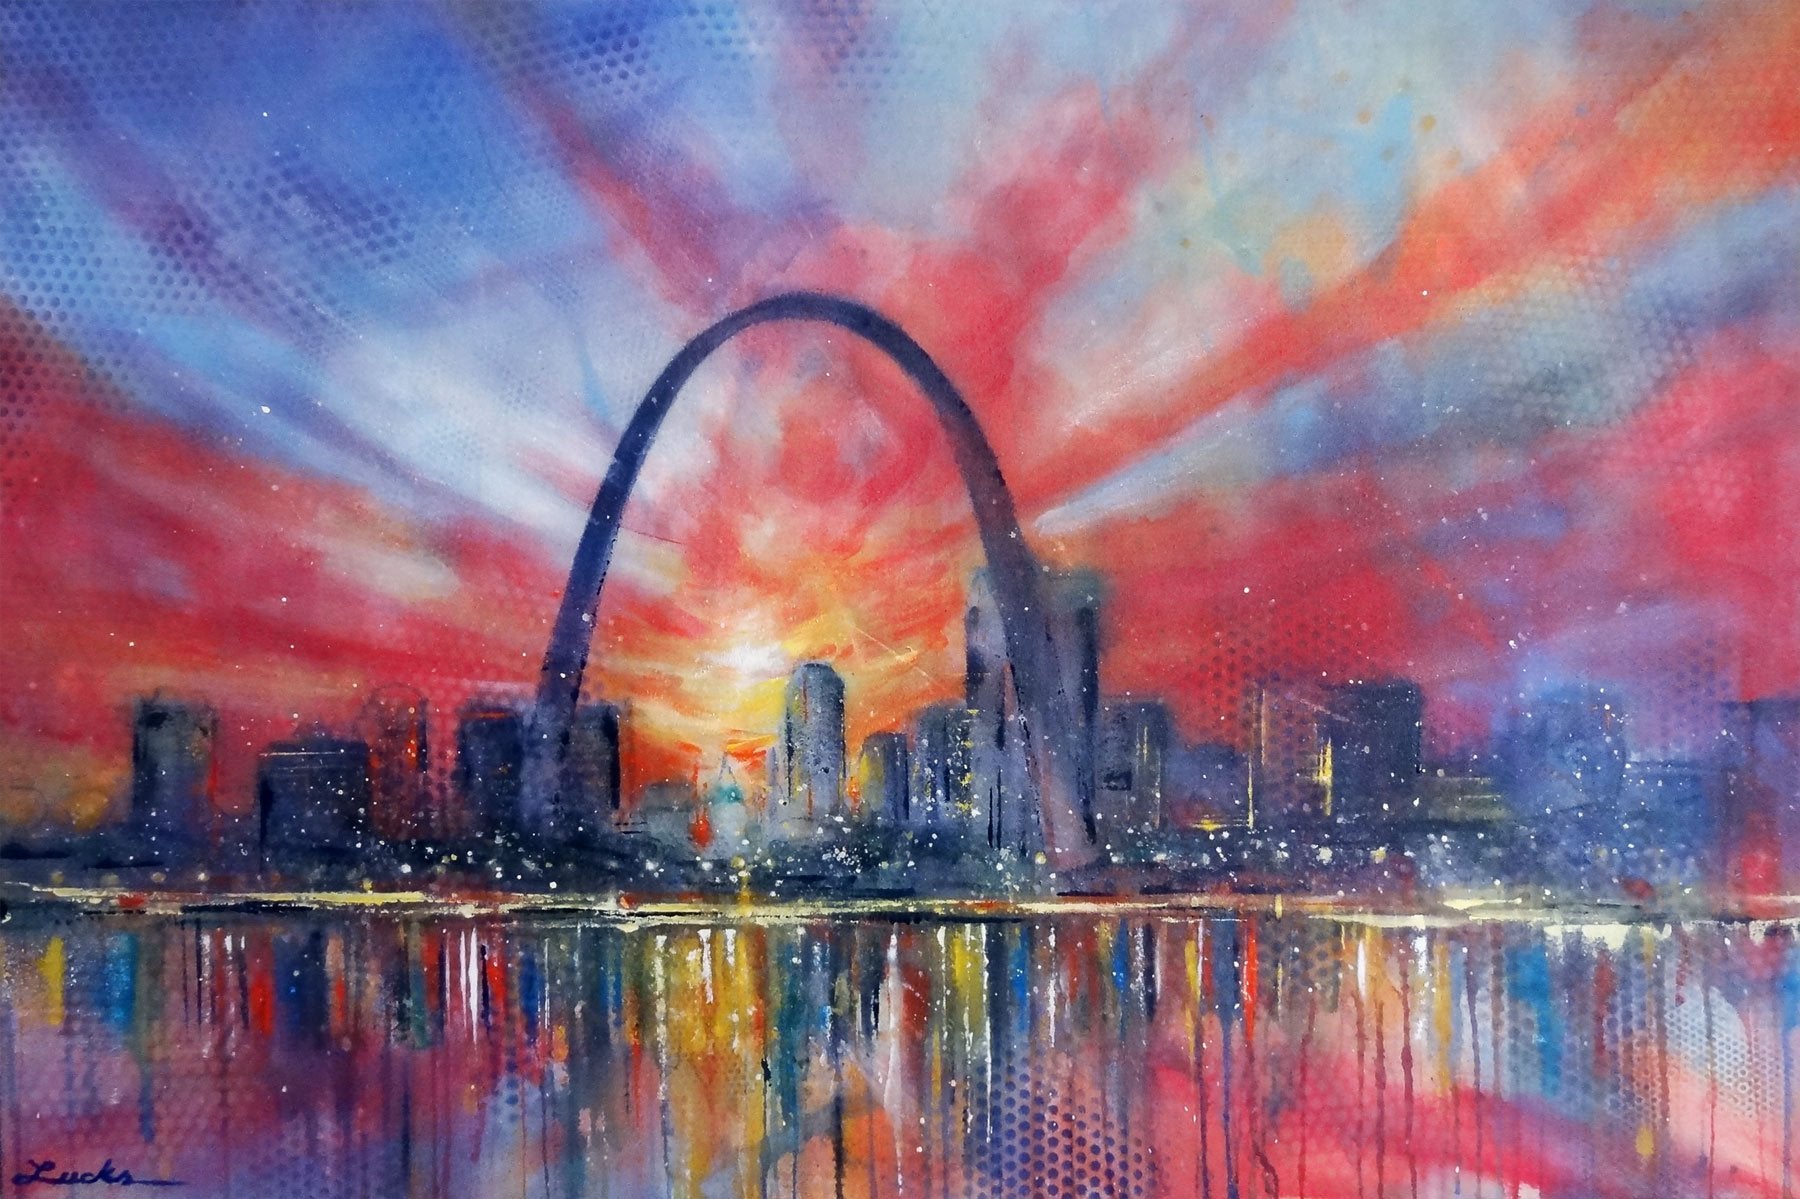 St Louis Arch painting - St Louis Skyline - by Anastasia Mak